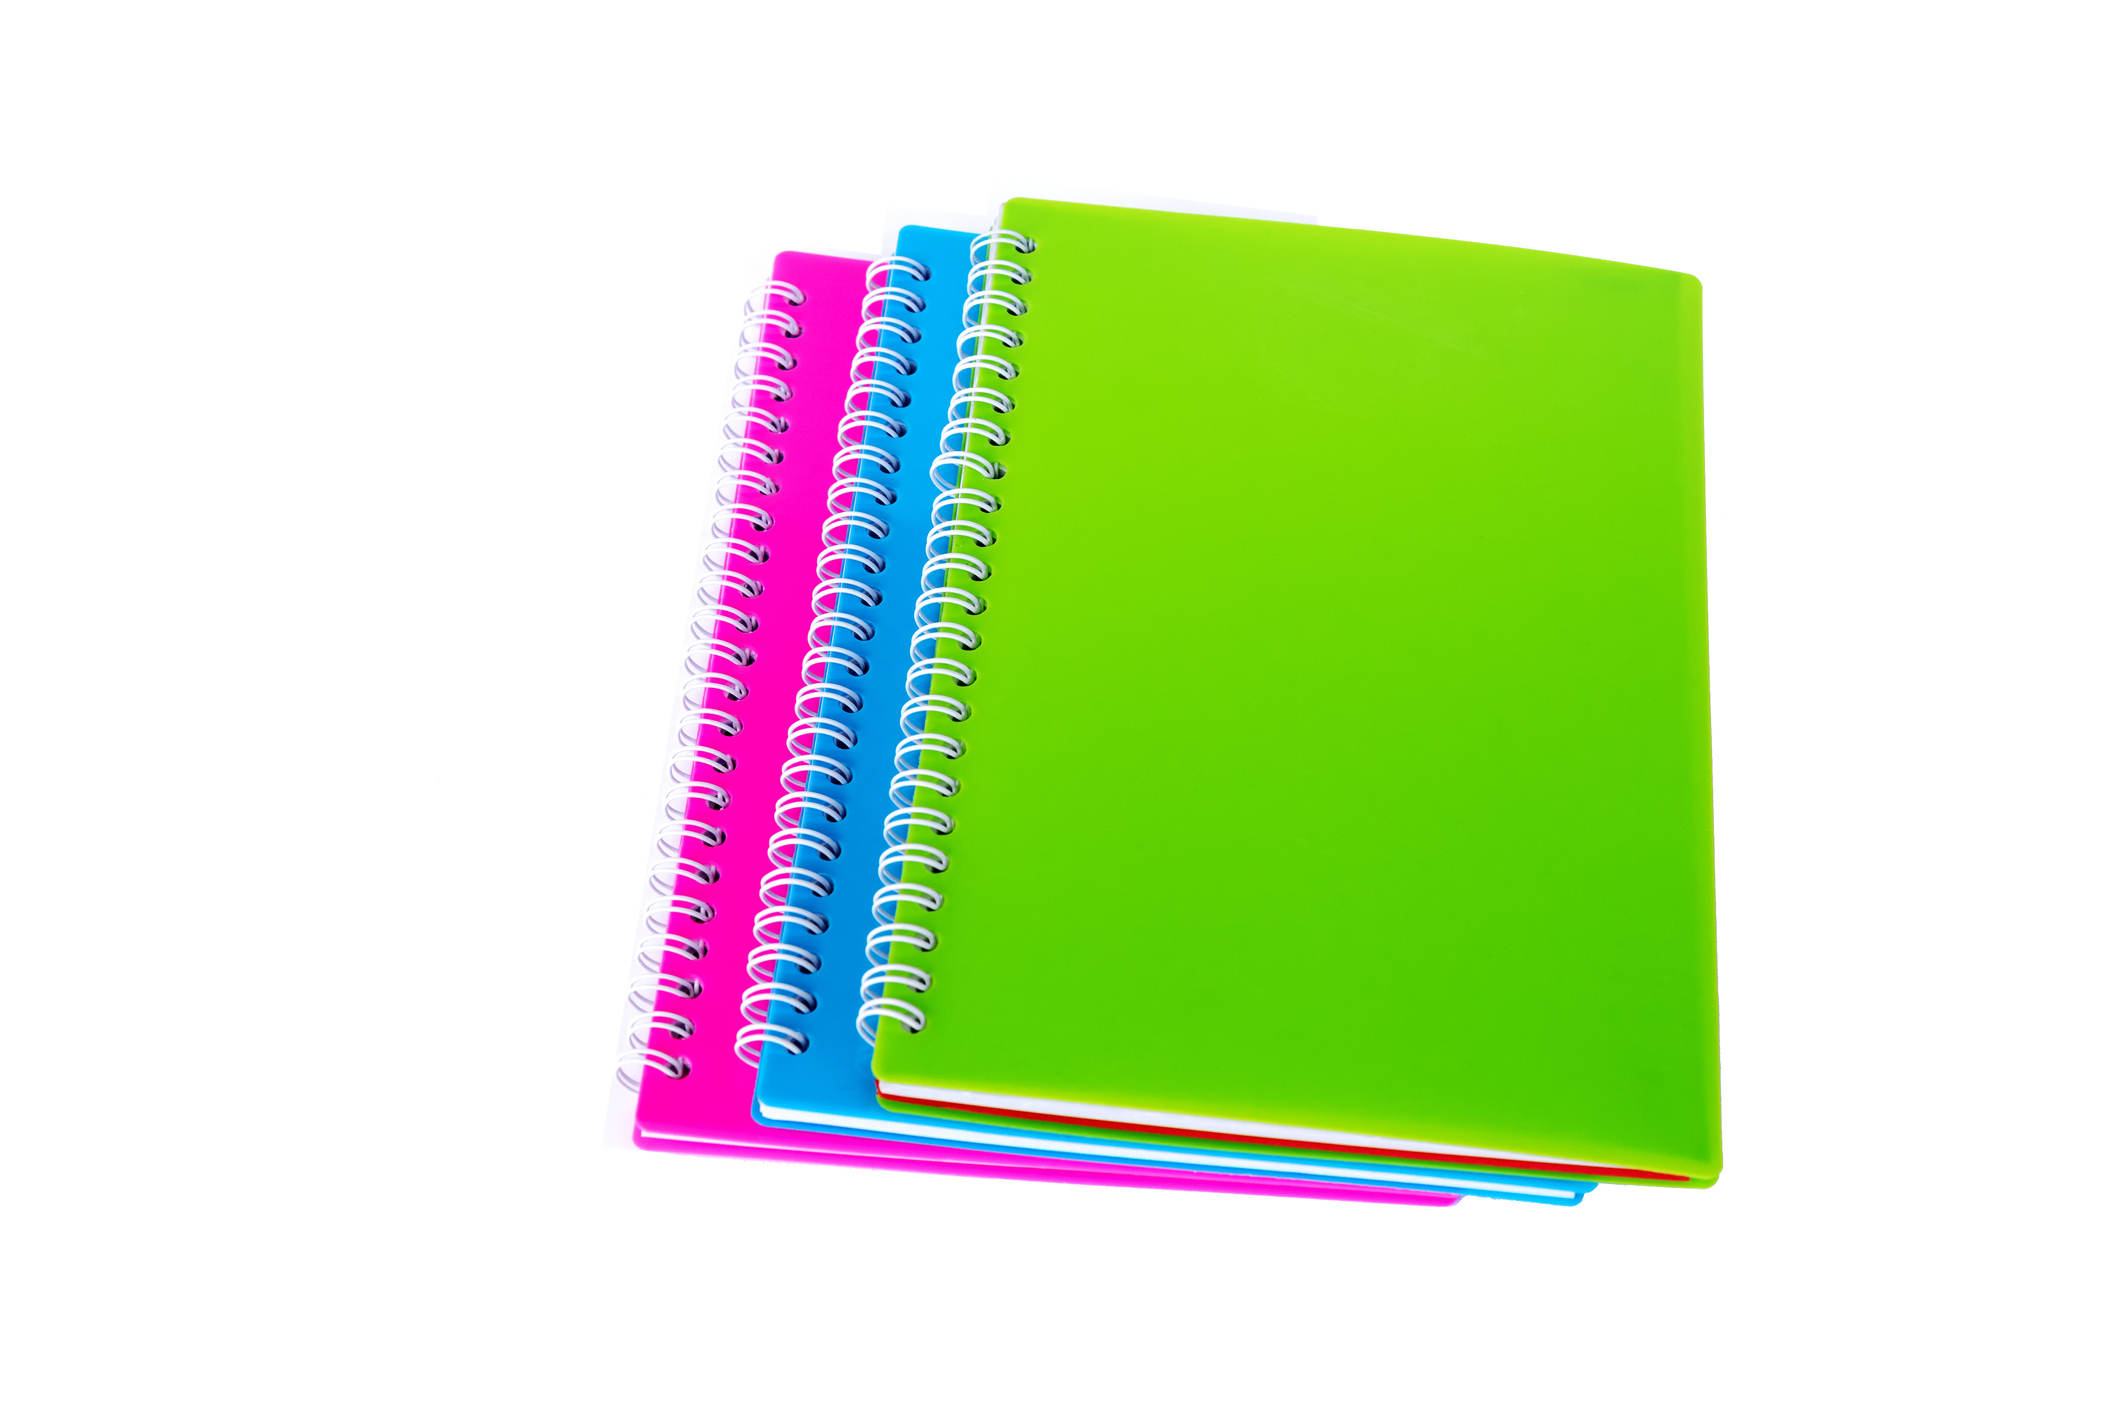 Stack of three spiral notebooks on a plain background